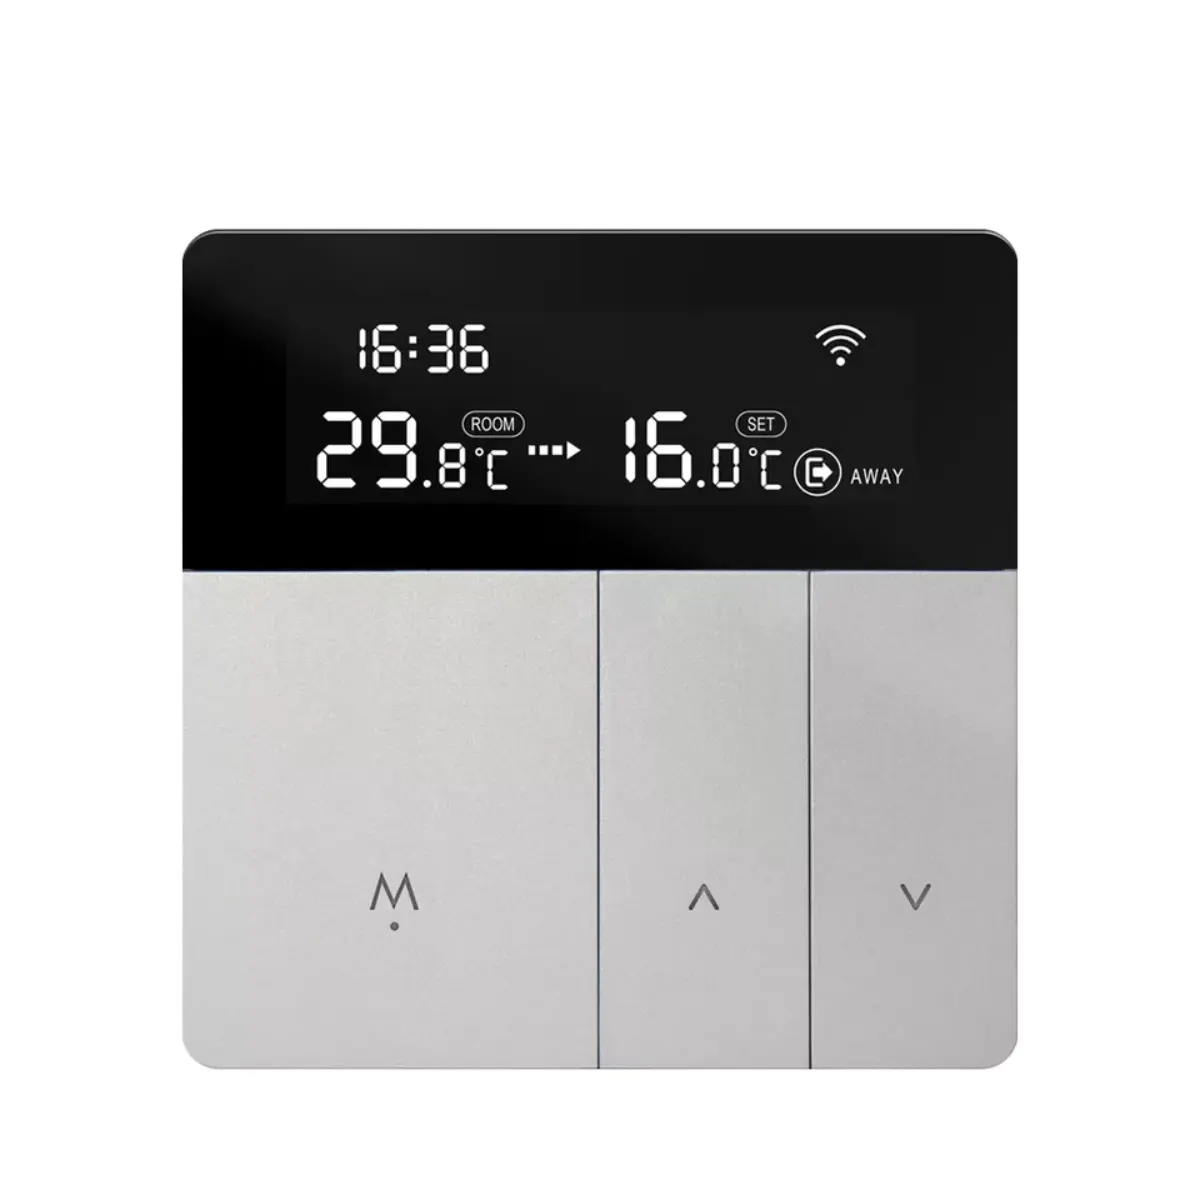 LCD Thermostat Water And Floor Heating Temperature Controller Mobile Phone WiFi Intelligent Remote Voice Control